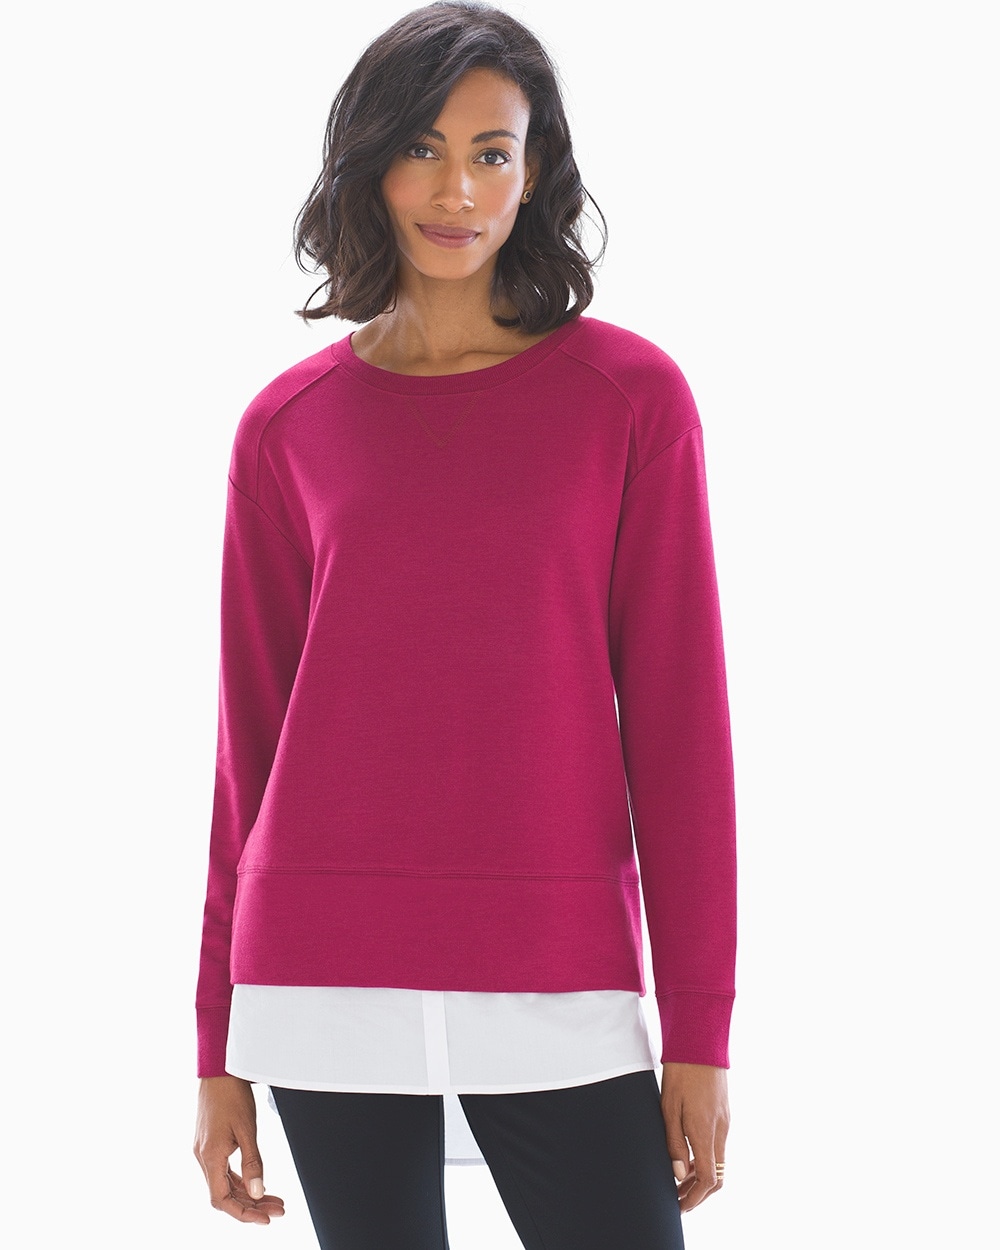 French Terry Modal Layered Look Sweatshirt Cranberry